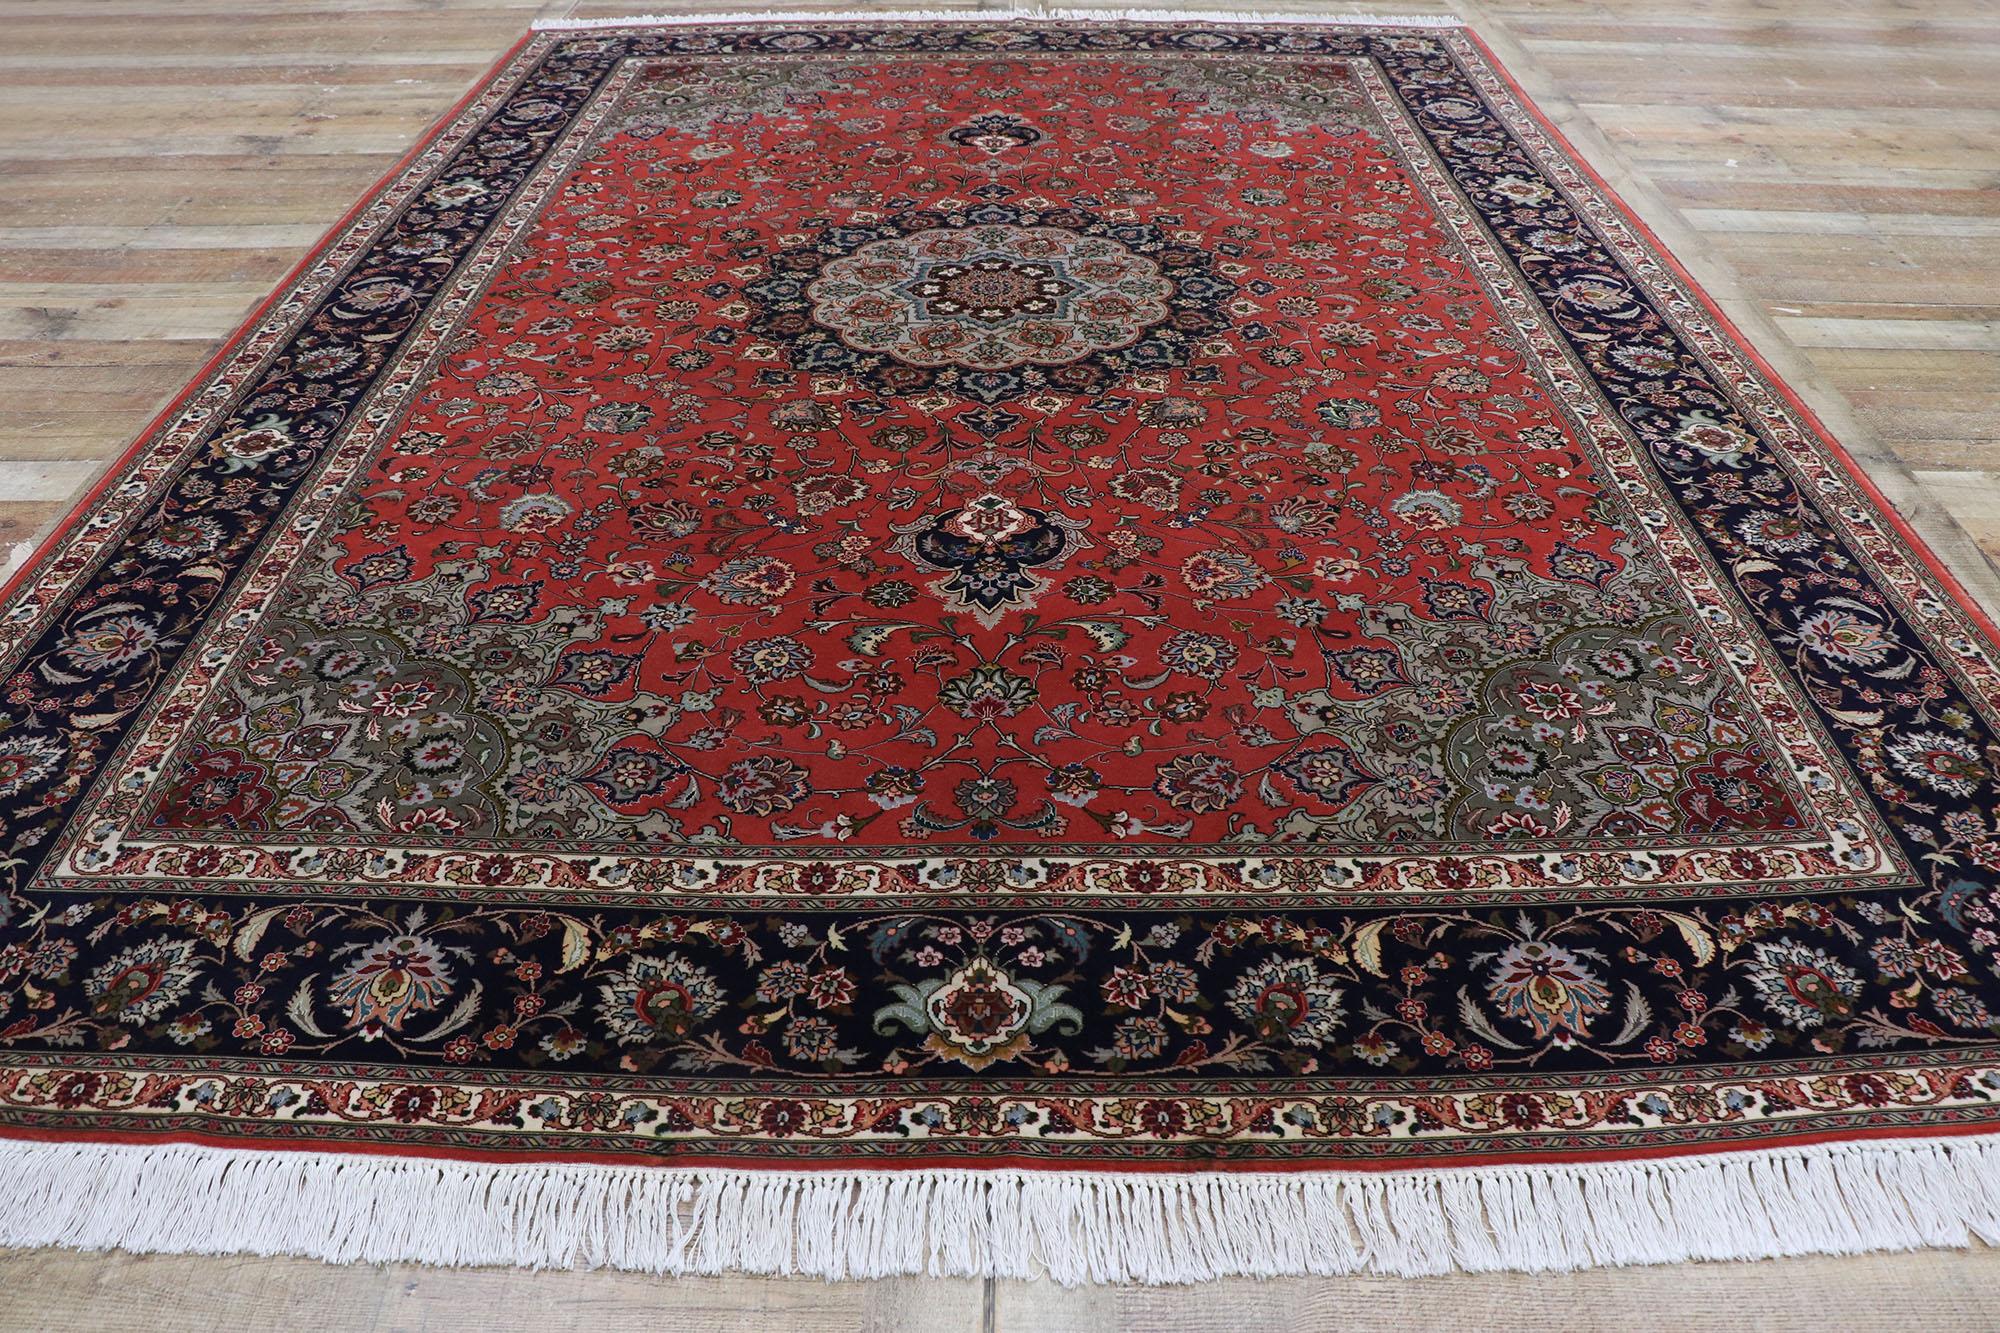 Vintage Persian Tabriz Rug with Victorian English Manor Style For Sale 1